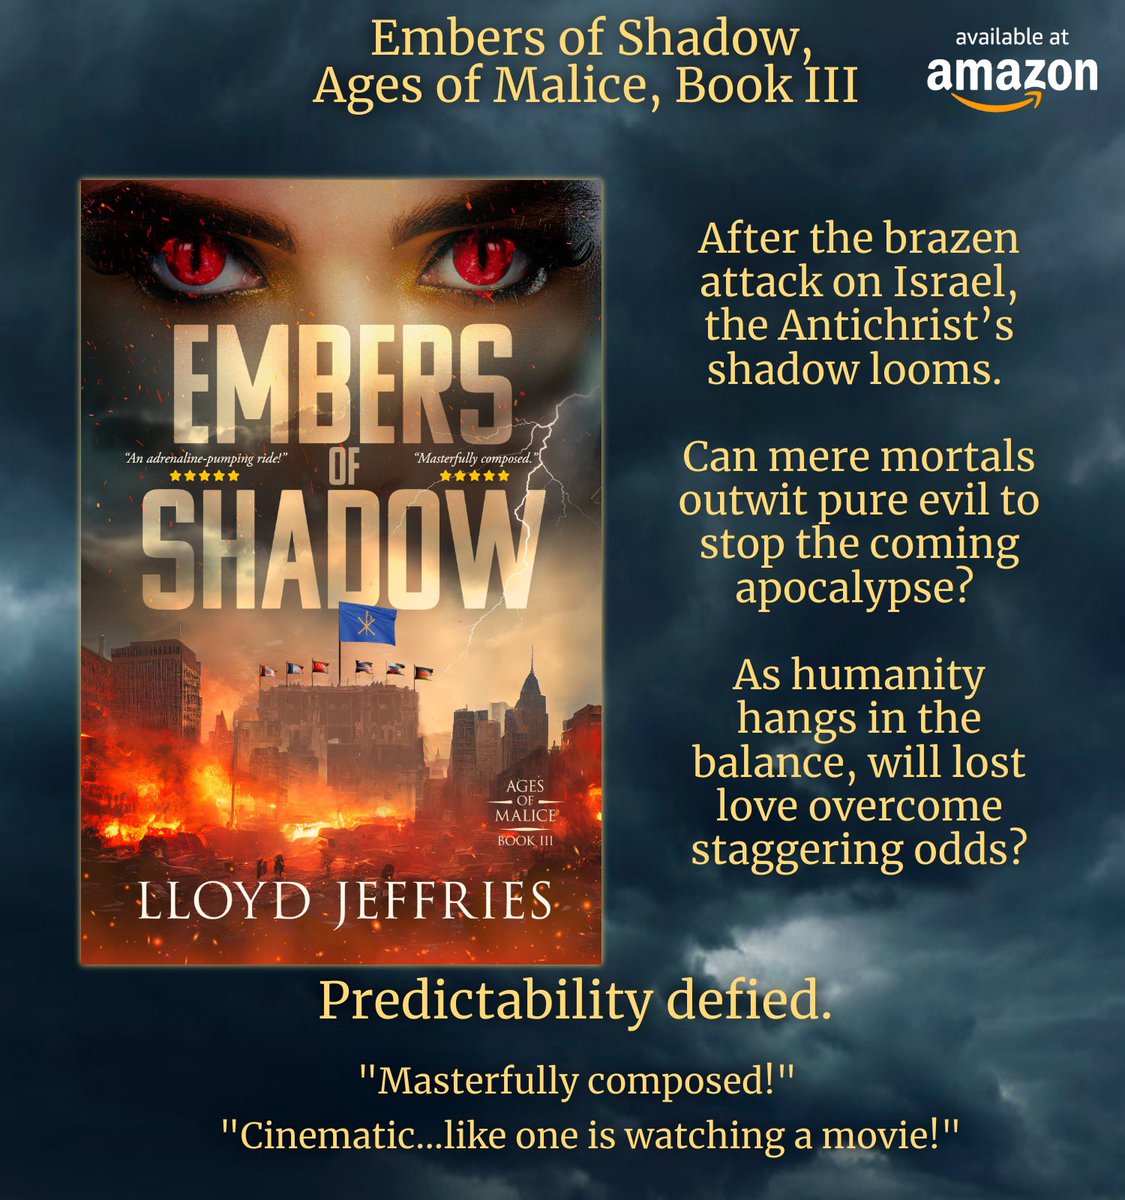 Available now! Embers of Shadow, the riveting next installment in the superlative Ages of Malice series. #thriller #religiousmystery #BooksWorthReading amazon.com/dp/B0BHXPDHYL